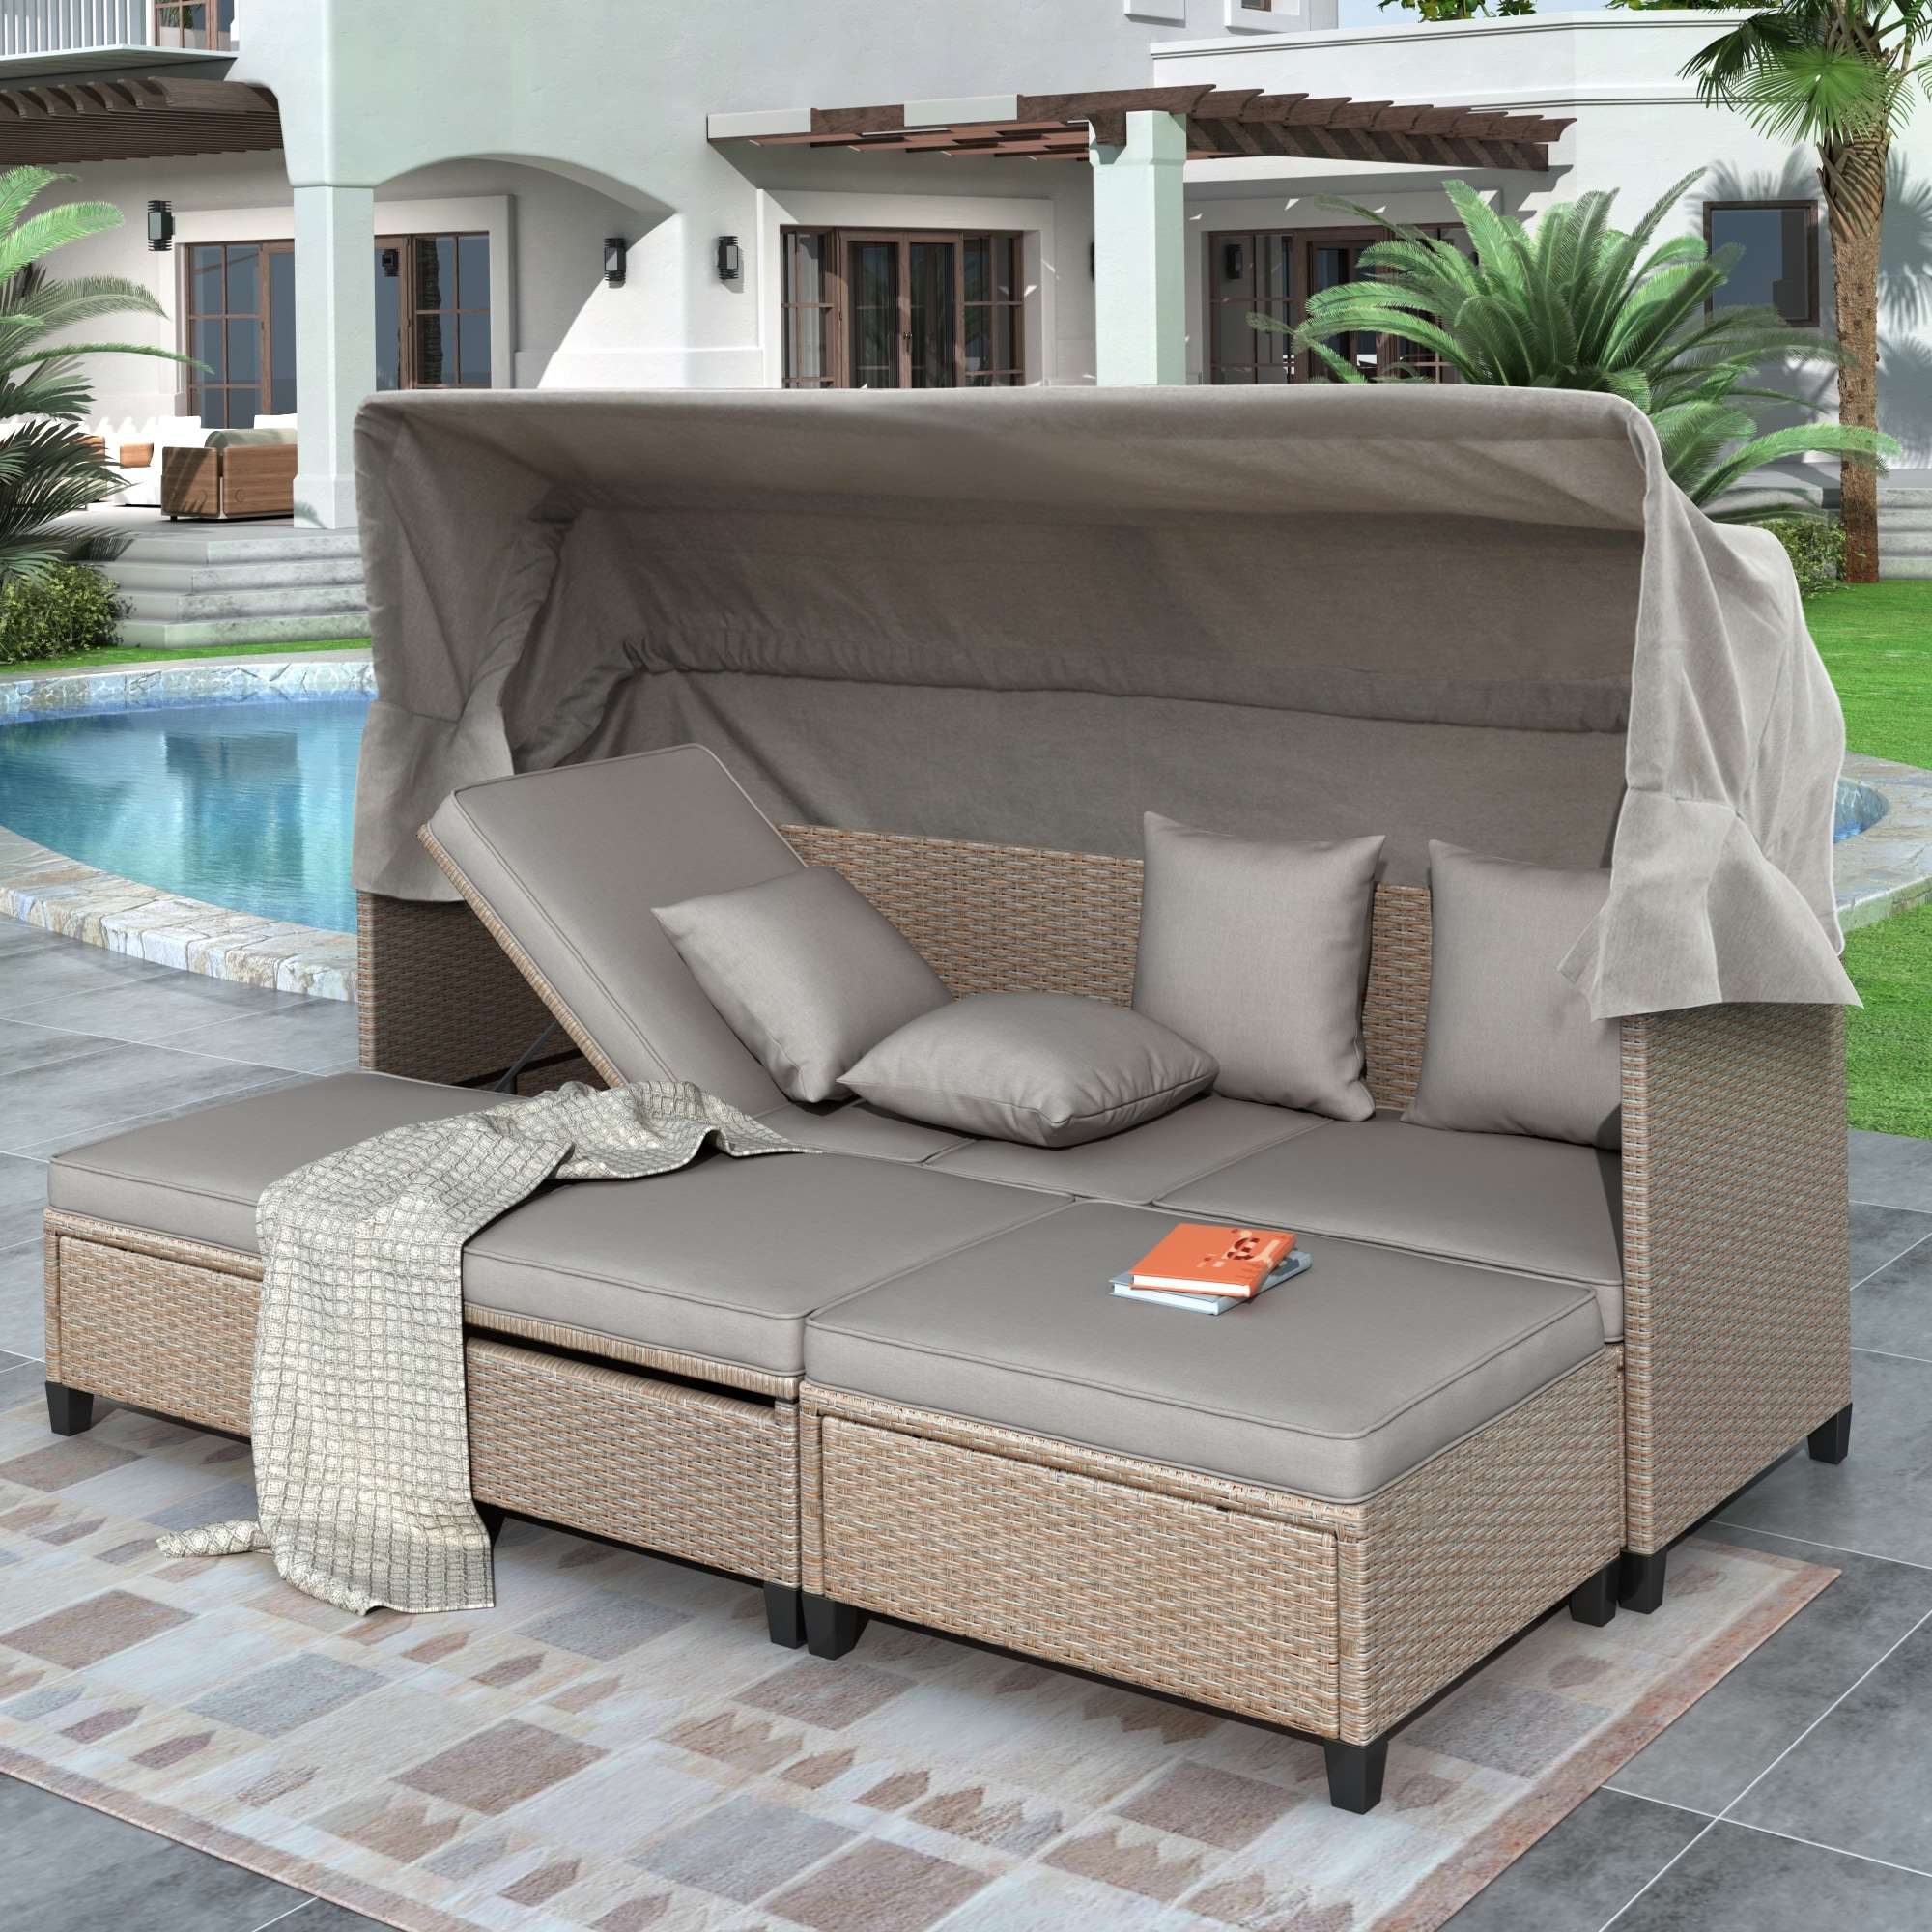 Outdoors Uv-resistant Sofa Set With Retractable Canopy  Lifting Table  Pillows  And Cushions